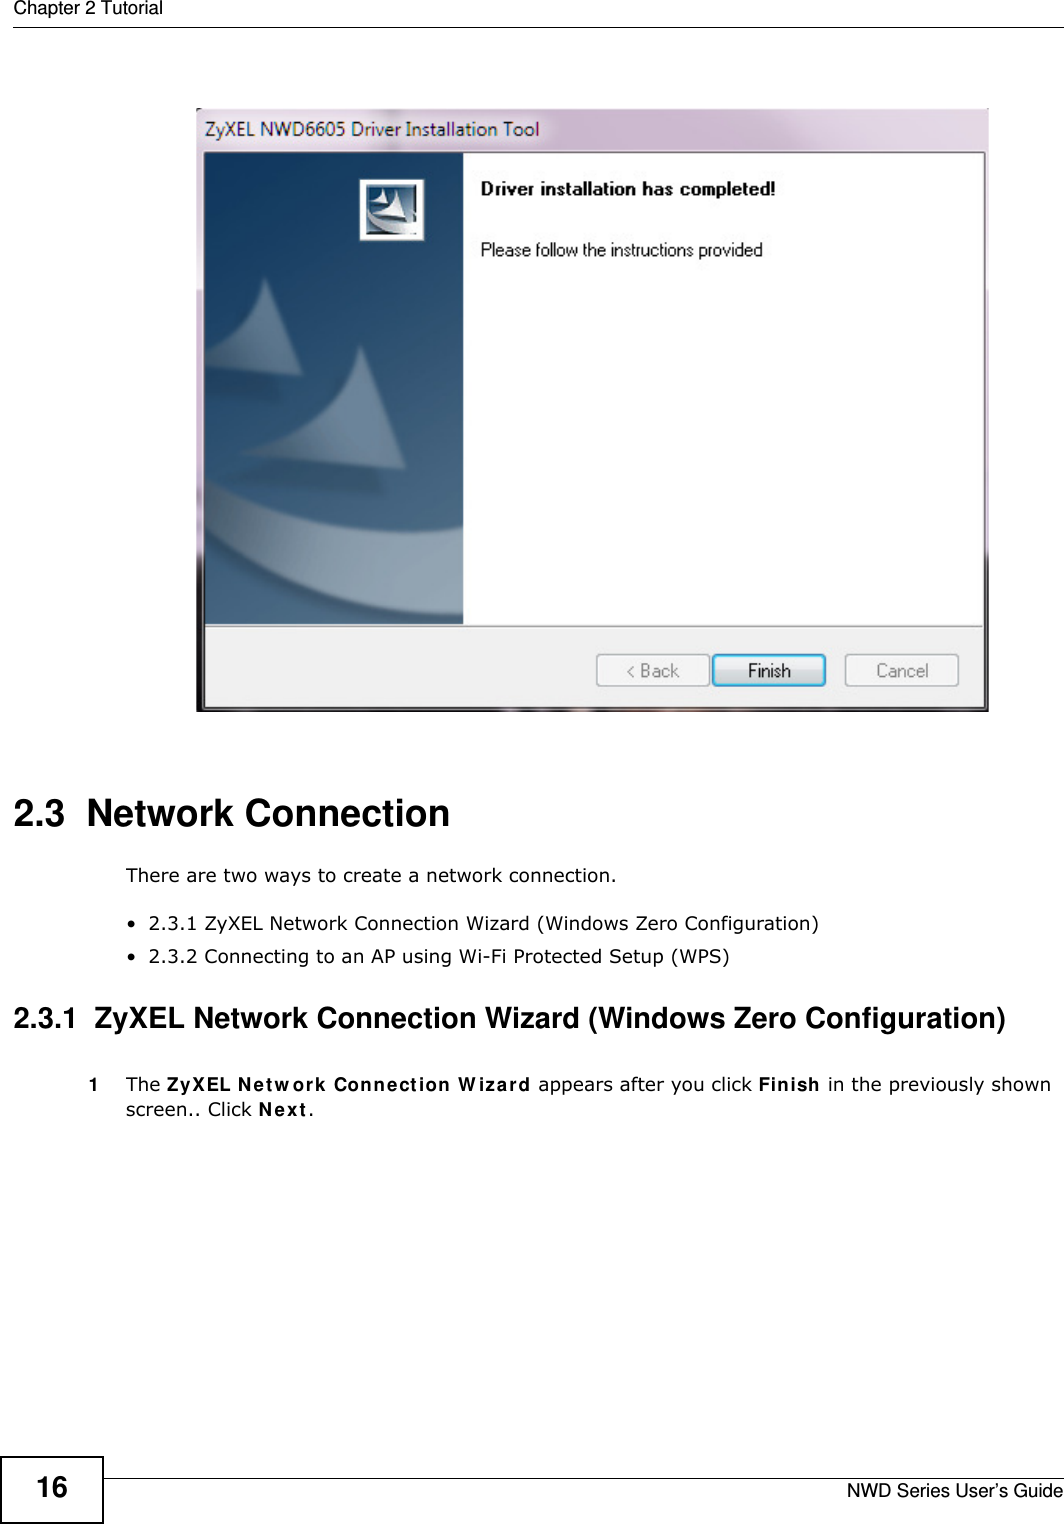 Chapter 2 TutorialNWD Series User’s Guide162.3  Network ConnectionThere are two ways to create a network connection.• 2.3.1 ZyXEL Network Connection Wizard (Windows Zero Configuration)• 2.3.2 Connecting to an AP using Wi-Fi Protected Setup (WPS)2.3.1  ZyXEL Network Connection Wizard (Windows Zero Configuration)1The ZyXEL Network Connection Wizard appears after you click Finish in the previously shown screen.. Click Next.